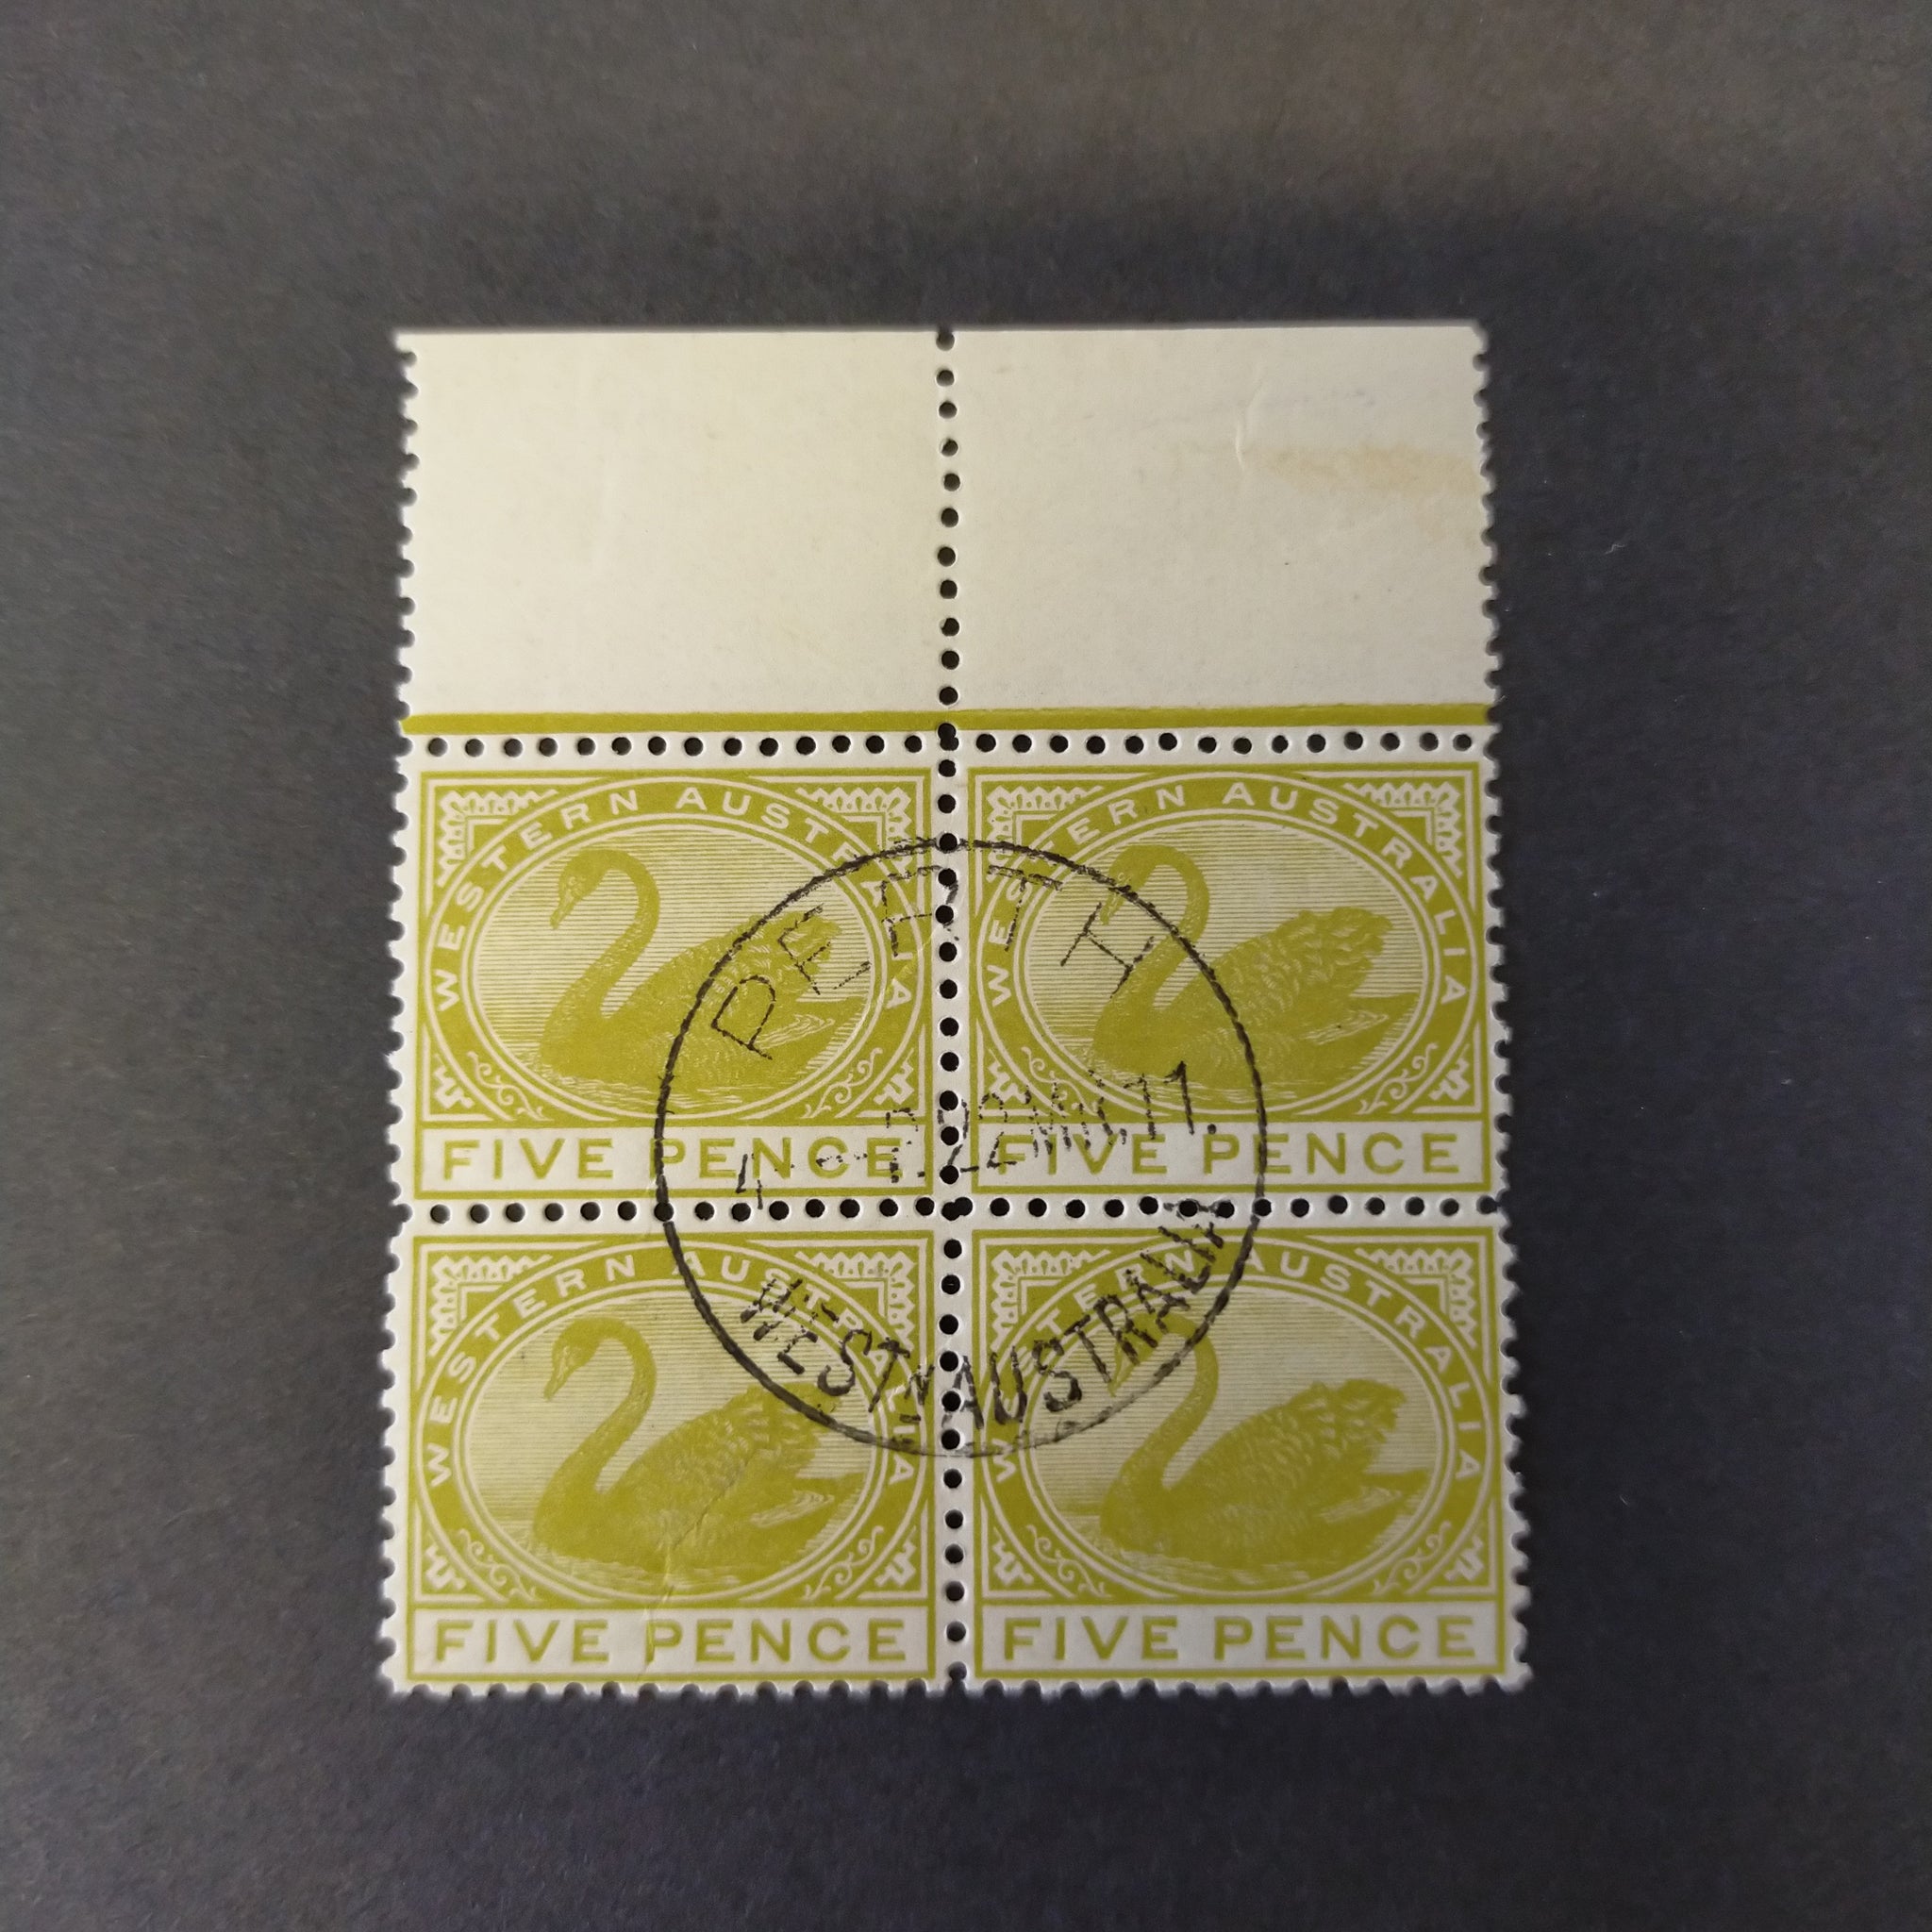 WA Western Australia Australian States SG 143a 1902-12 5d Olive-Green Block of 4 MUH CTO Perth CDS Wmk Double Lined A/Crown Perf 12 1/2